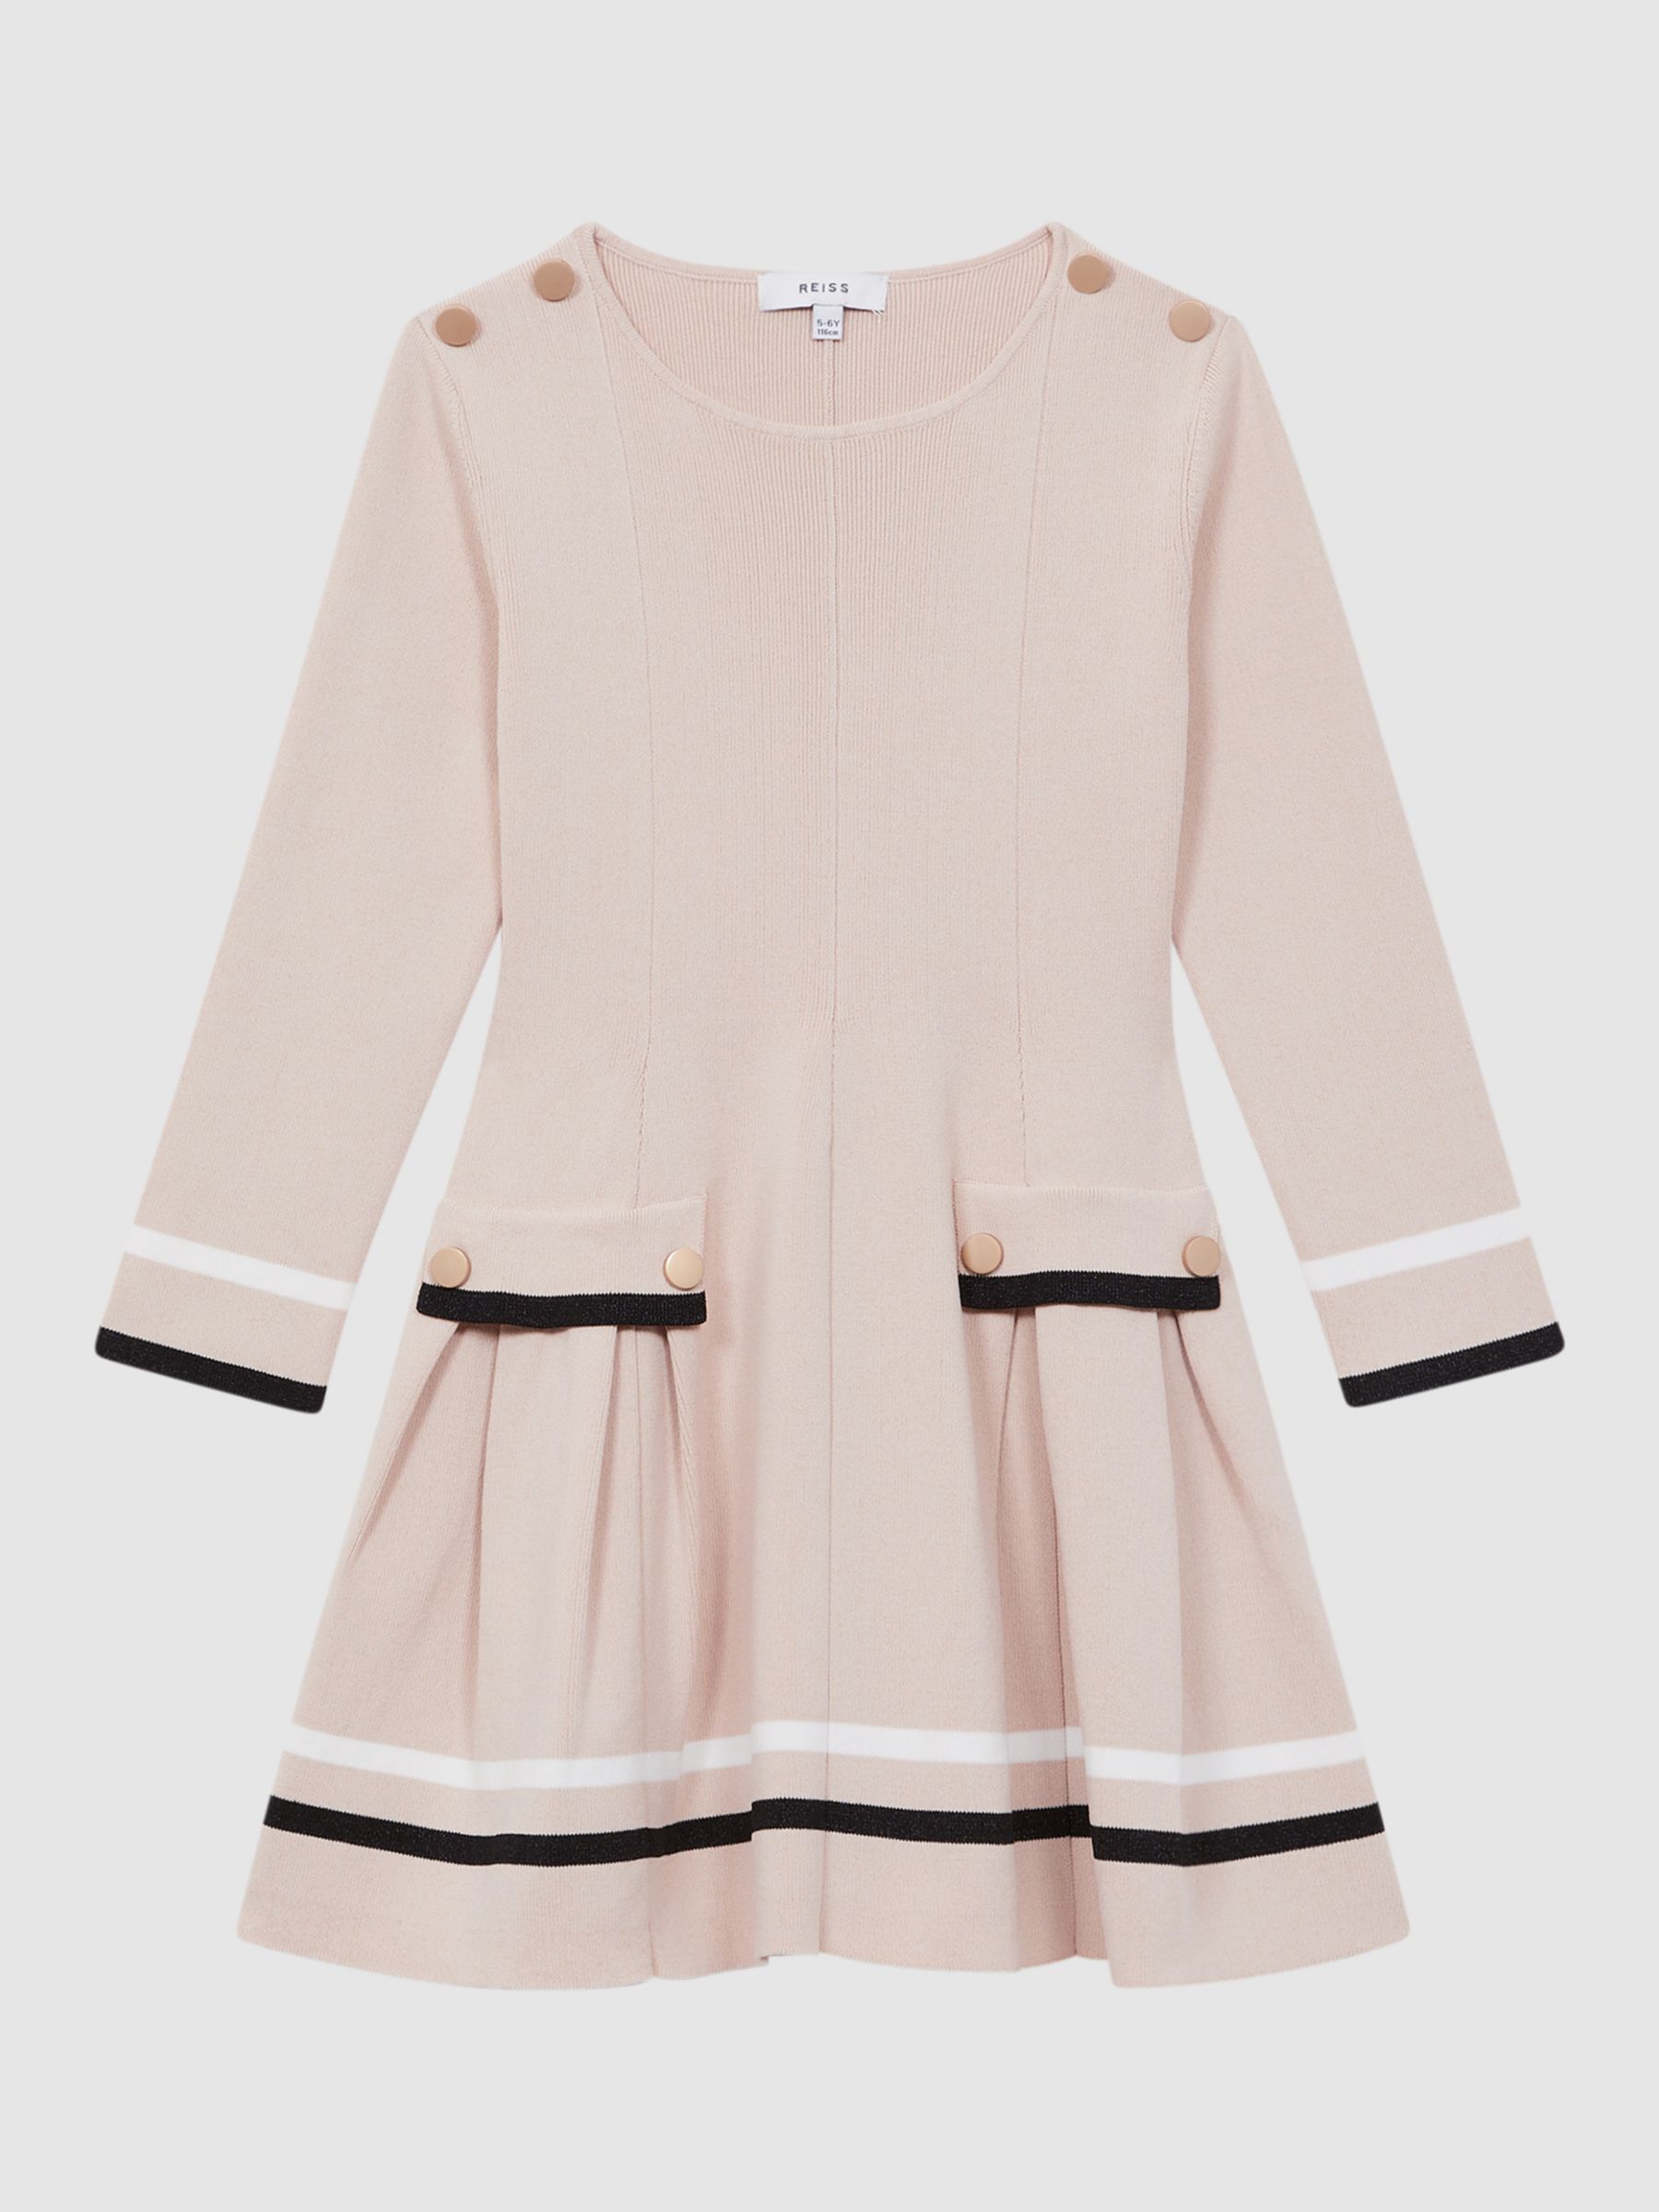 Buy Reiss Kids' Paige Knitted Stripe Dress Online at johnlewis.com